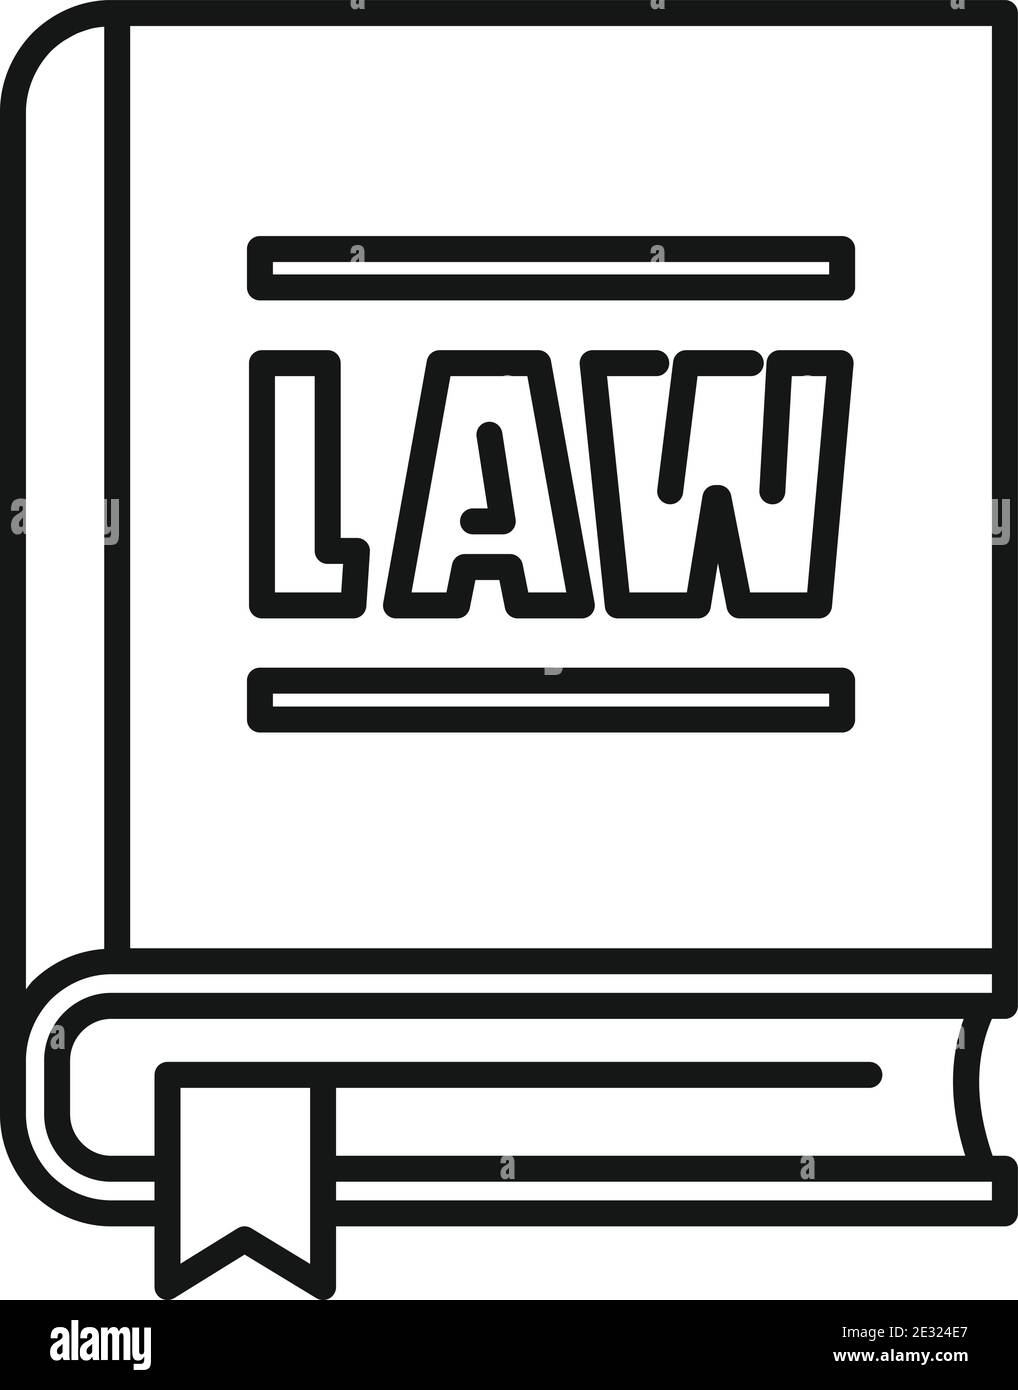 Policeman law icon, outline style Stock Vector